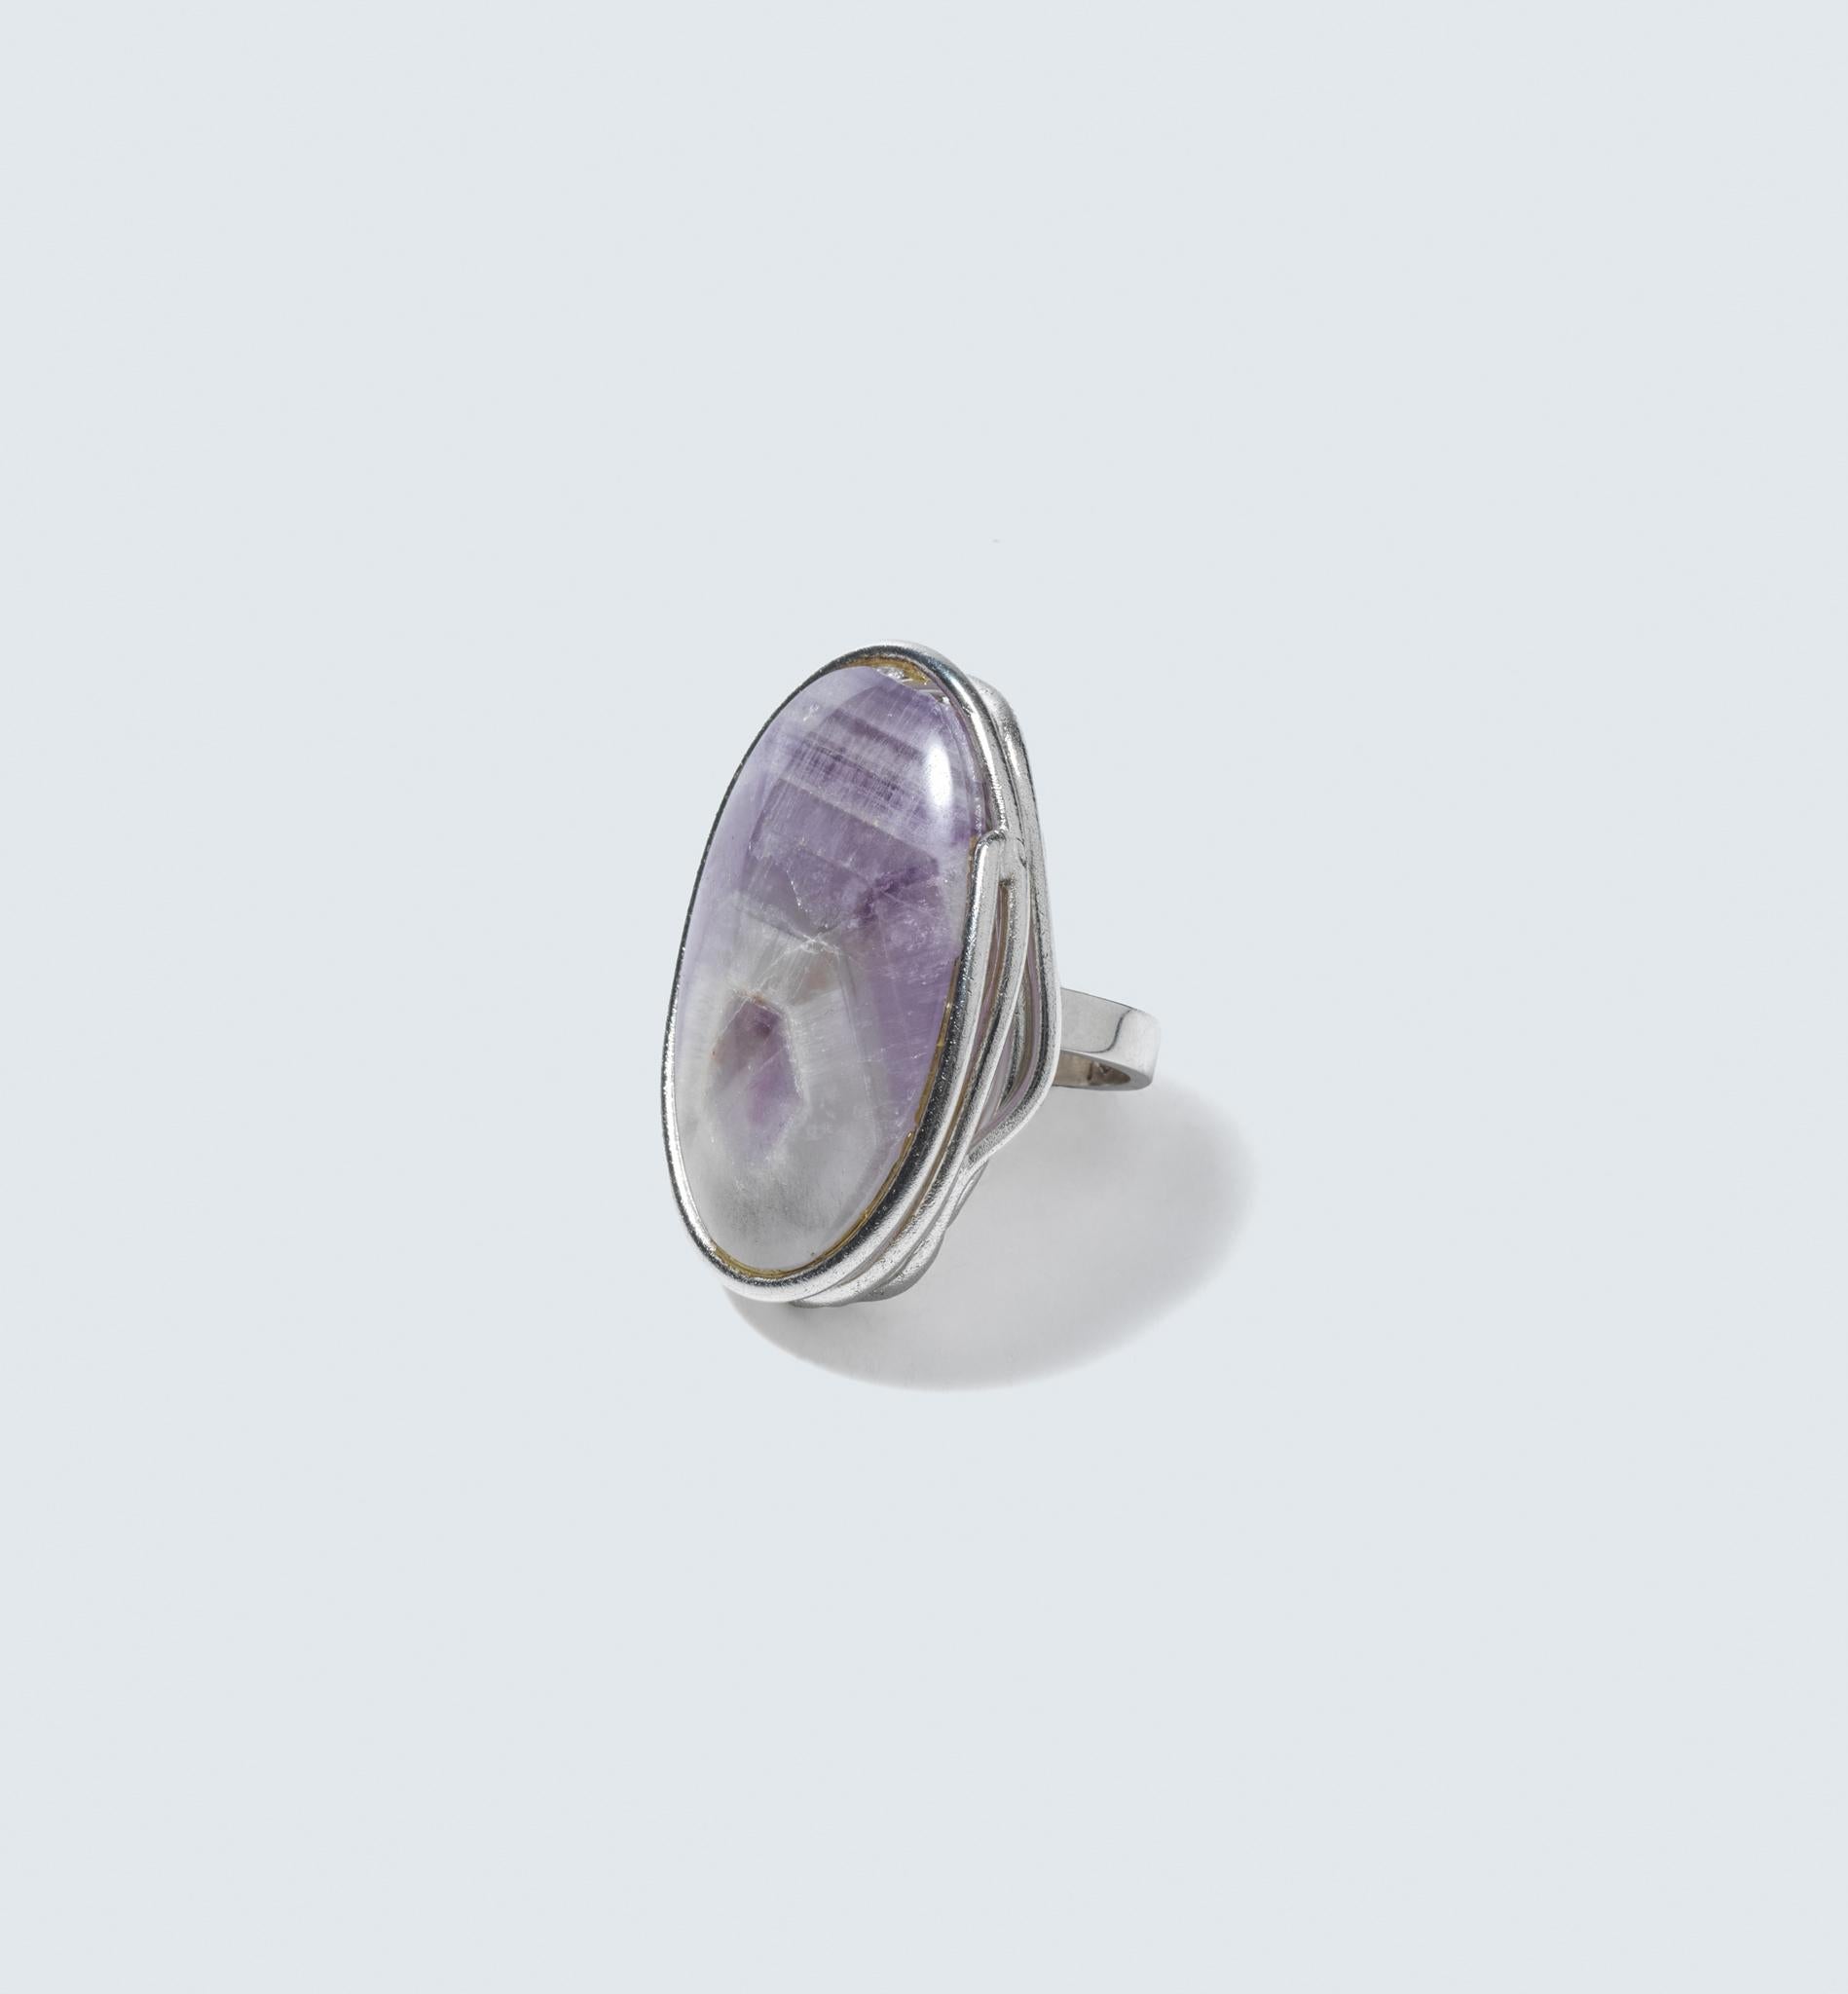 Cabochon Vintage Very large Silver and Amethyst Ring made Year 1974 For Sale